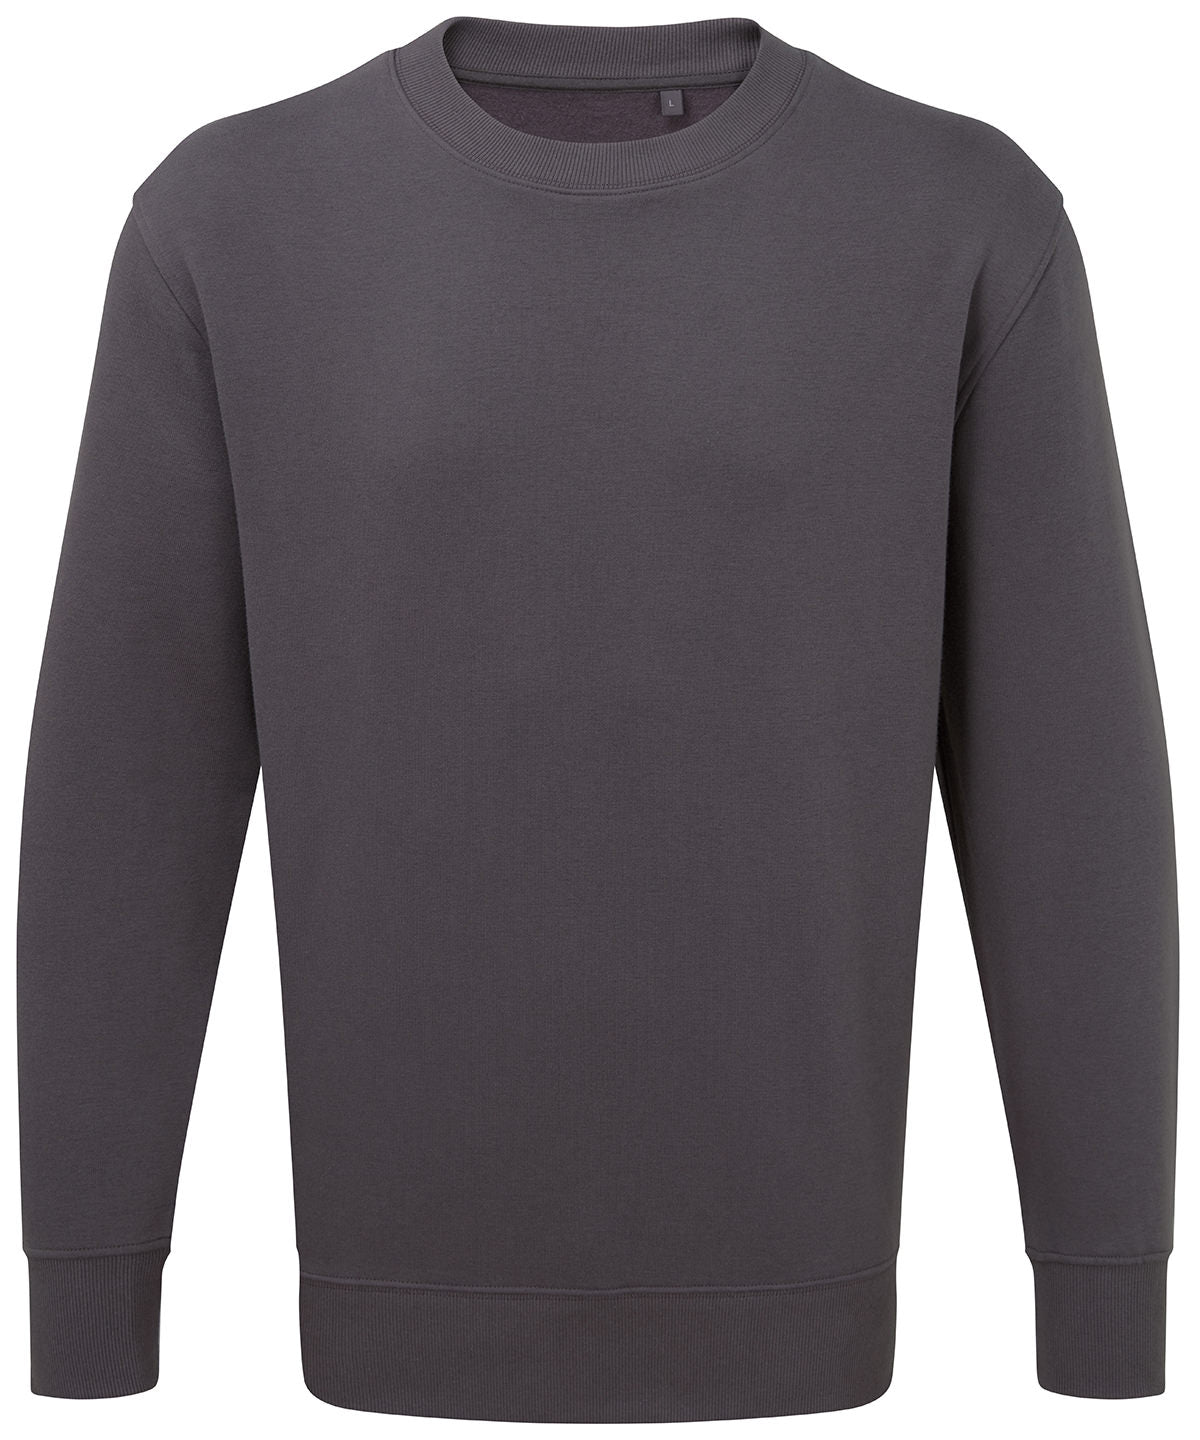 ANTHEM AM020  Relaxed fit Brushed inner fleece Ribbed crew neck Sweatshirt - COOZO